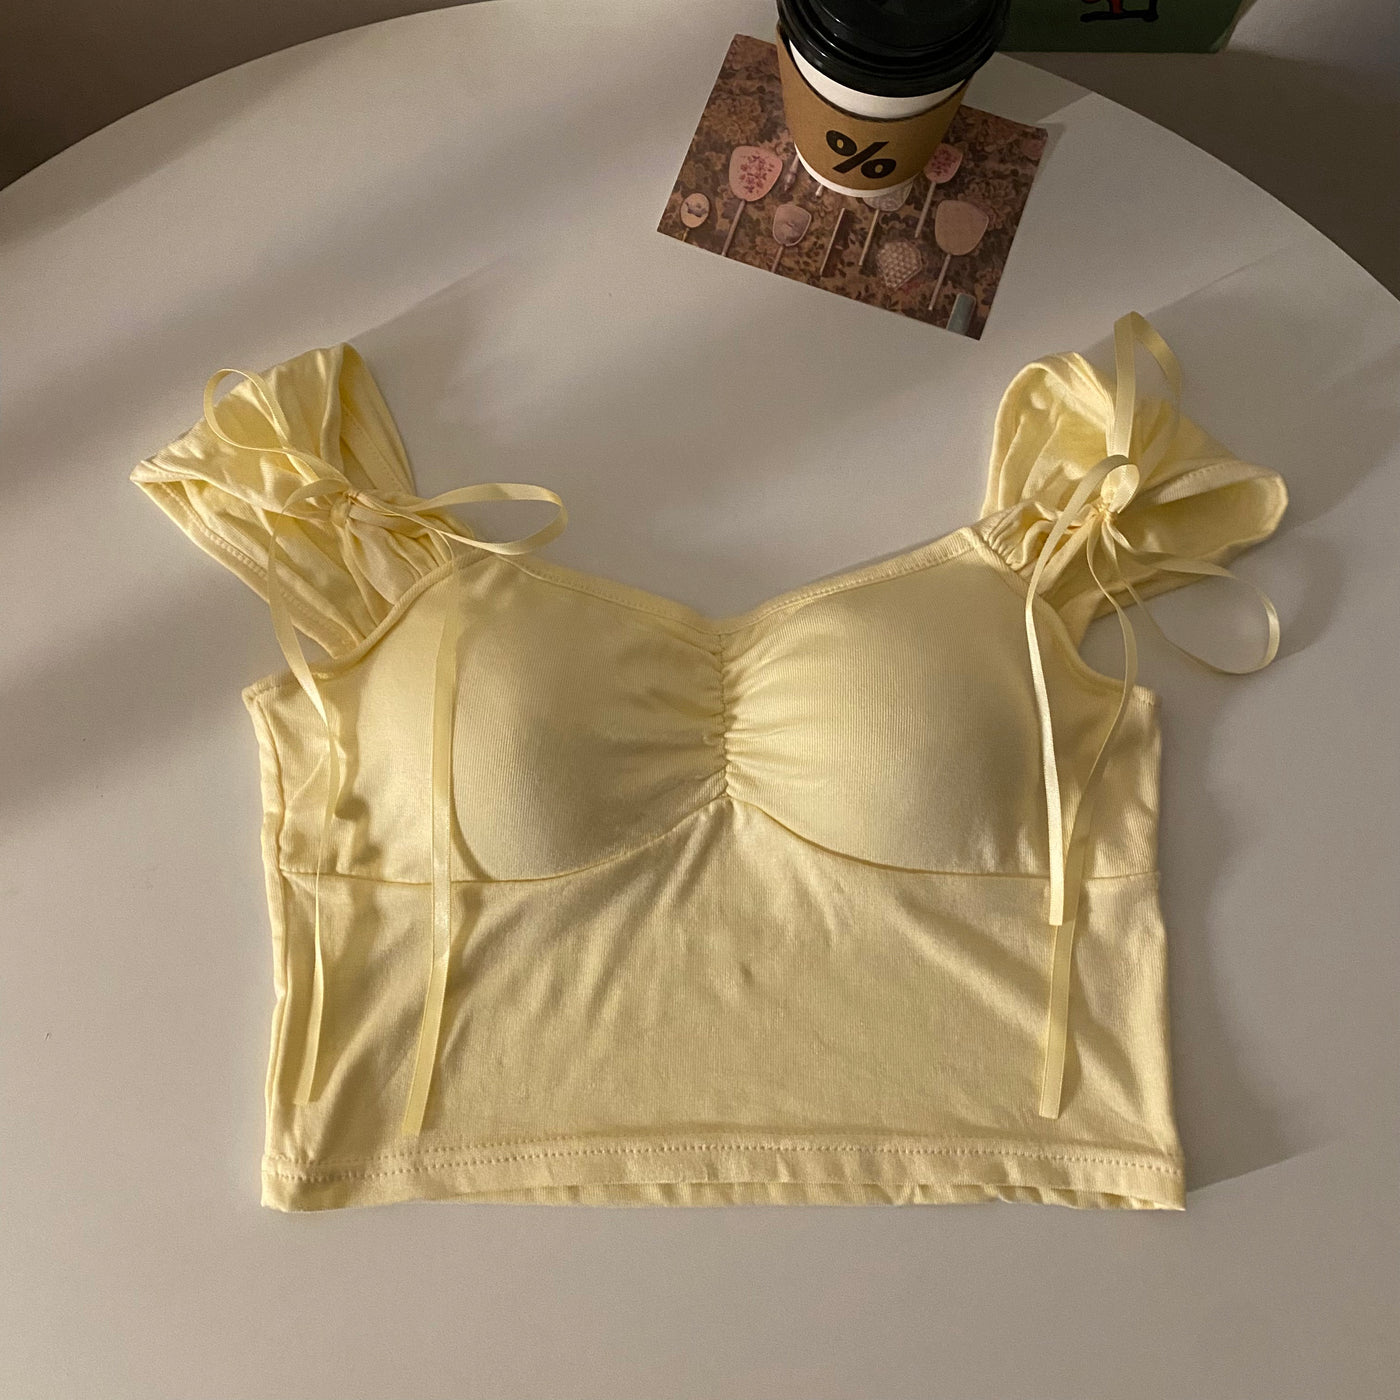 Bra Tops For Women With Bra Pads And Tank Tops